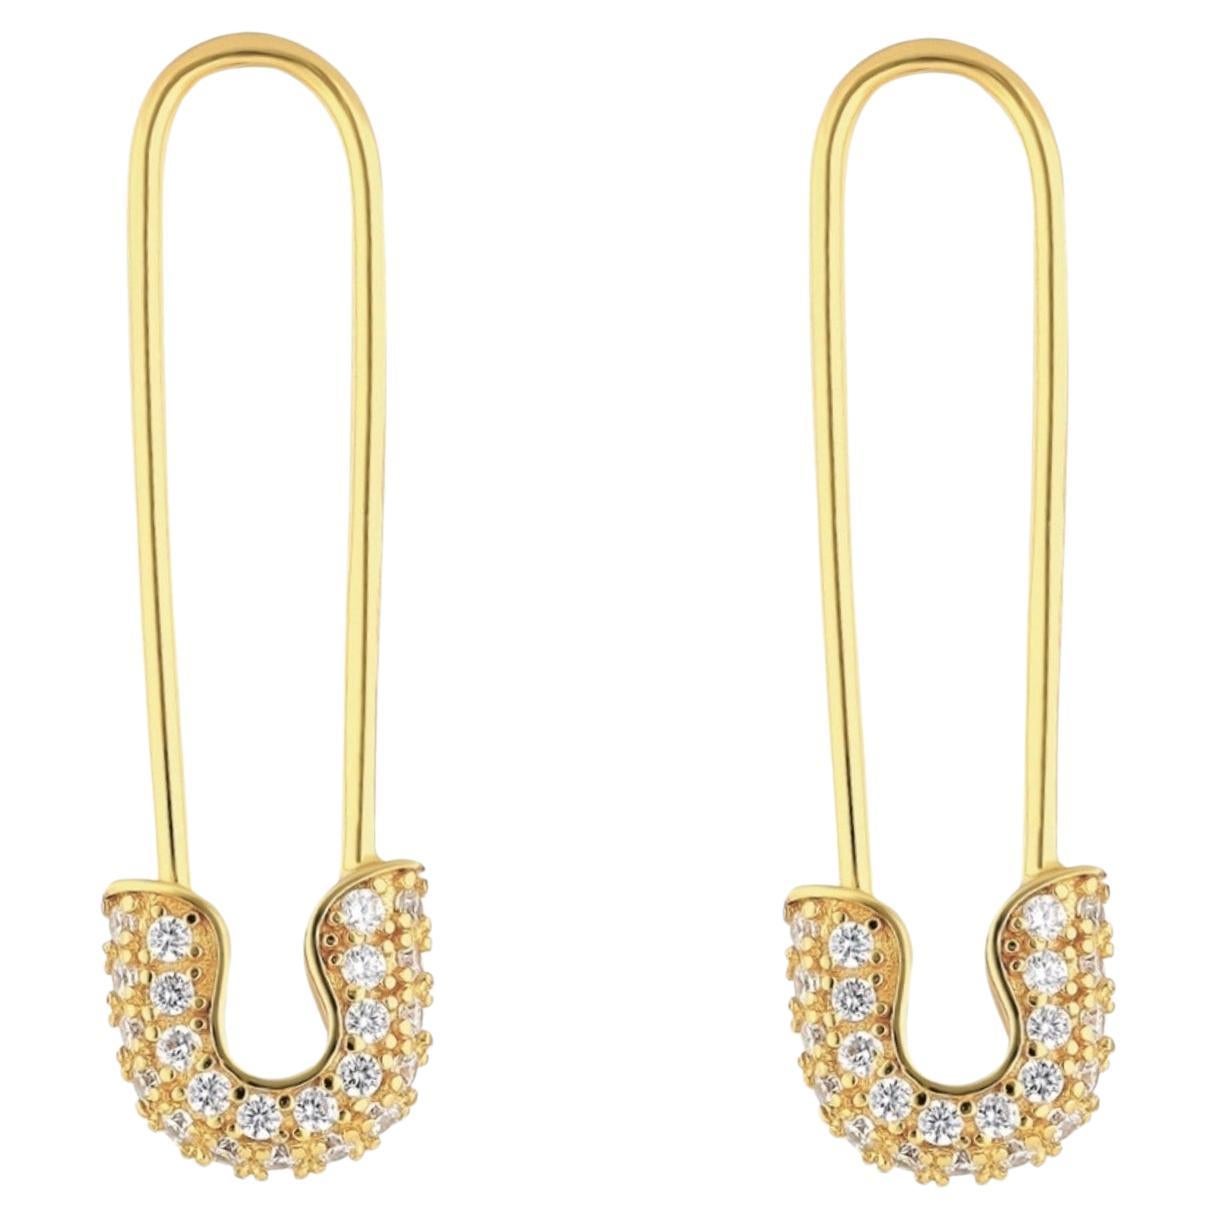 Sophia's Gold Safety Pin Earring